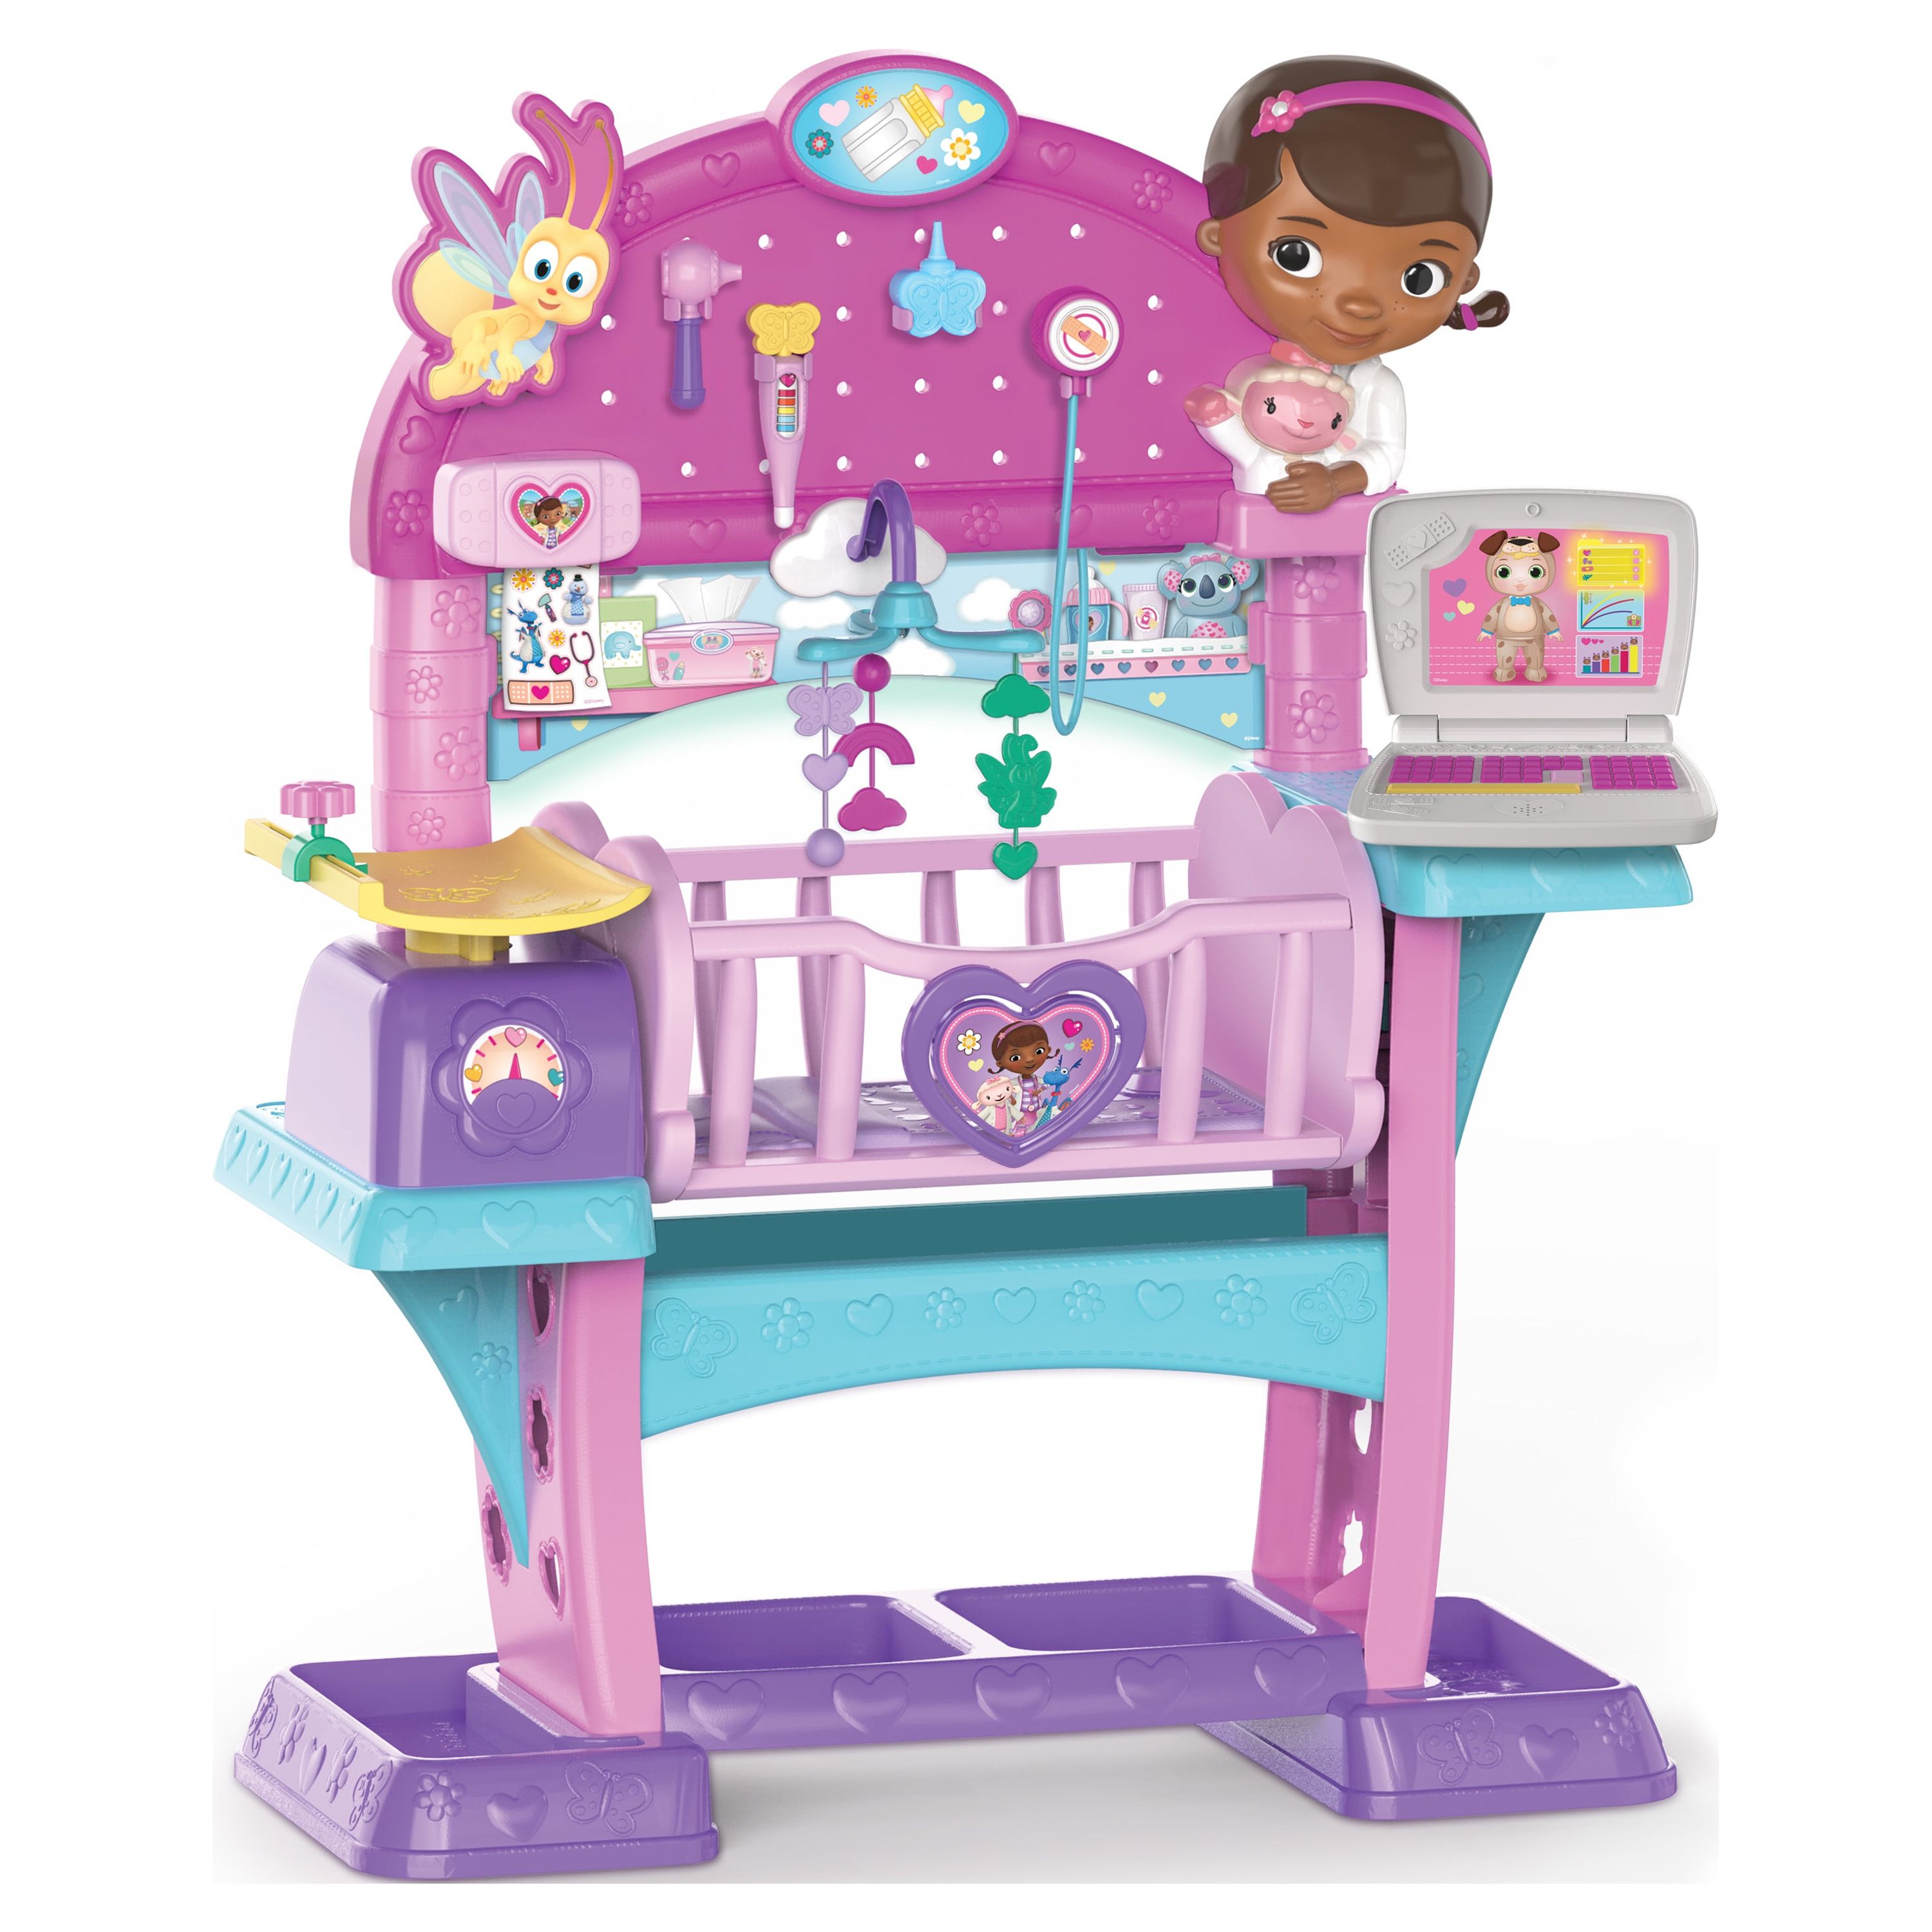 Doc McStuffins Baby All-in-One Nursery, Officially Licensed Kids Toys for Ages 3 Up, Gifts and Presents - image 1 of 3